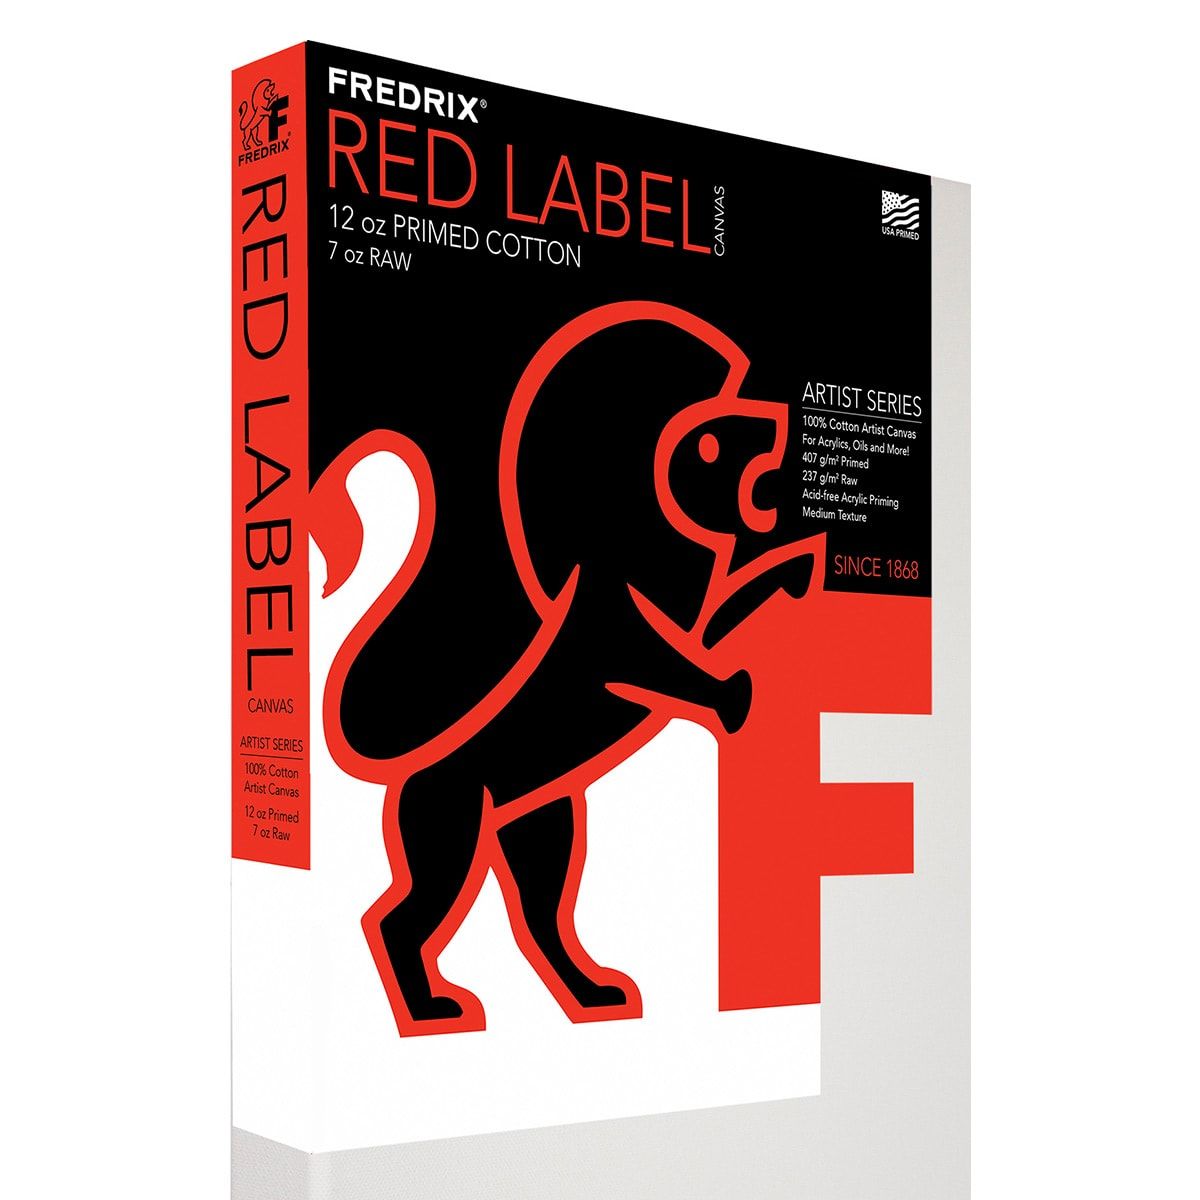 Fredrix Red Label Gallery Wrap Stretched Canvas